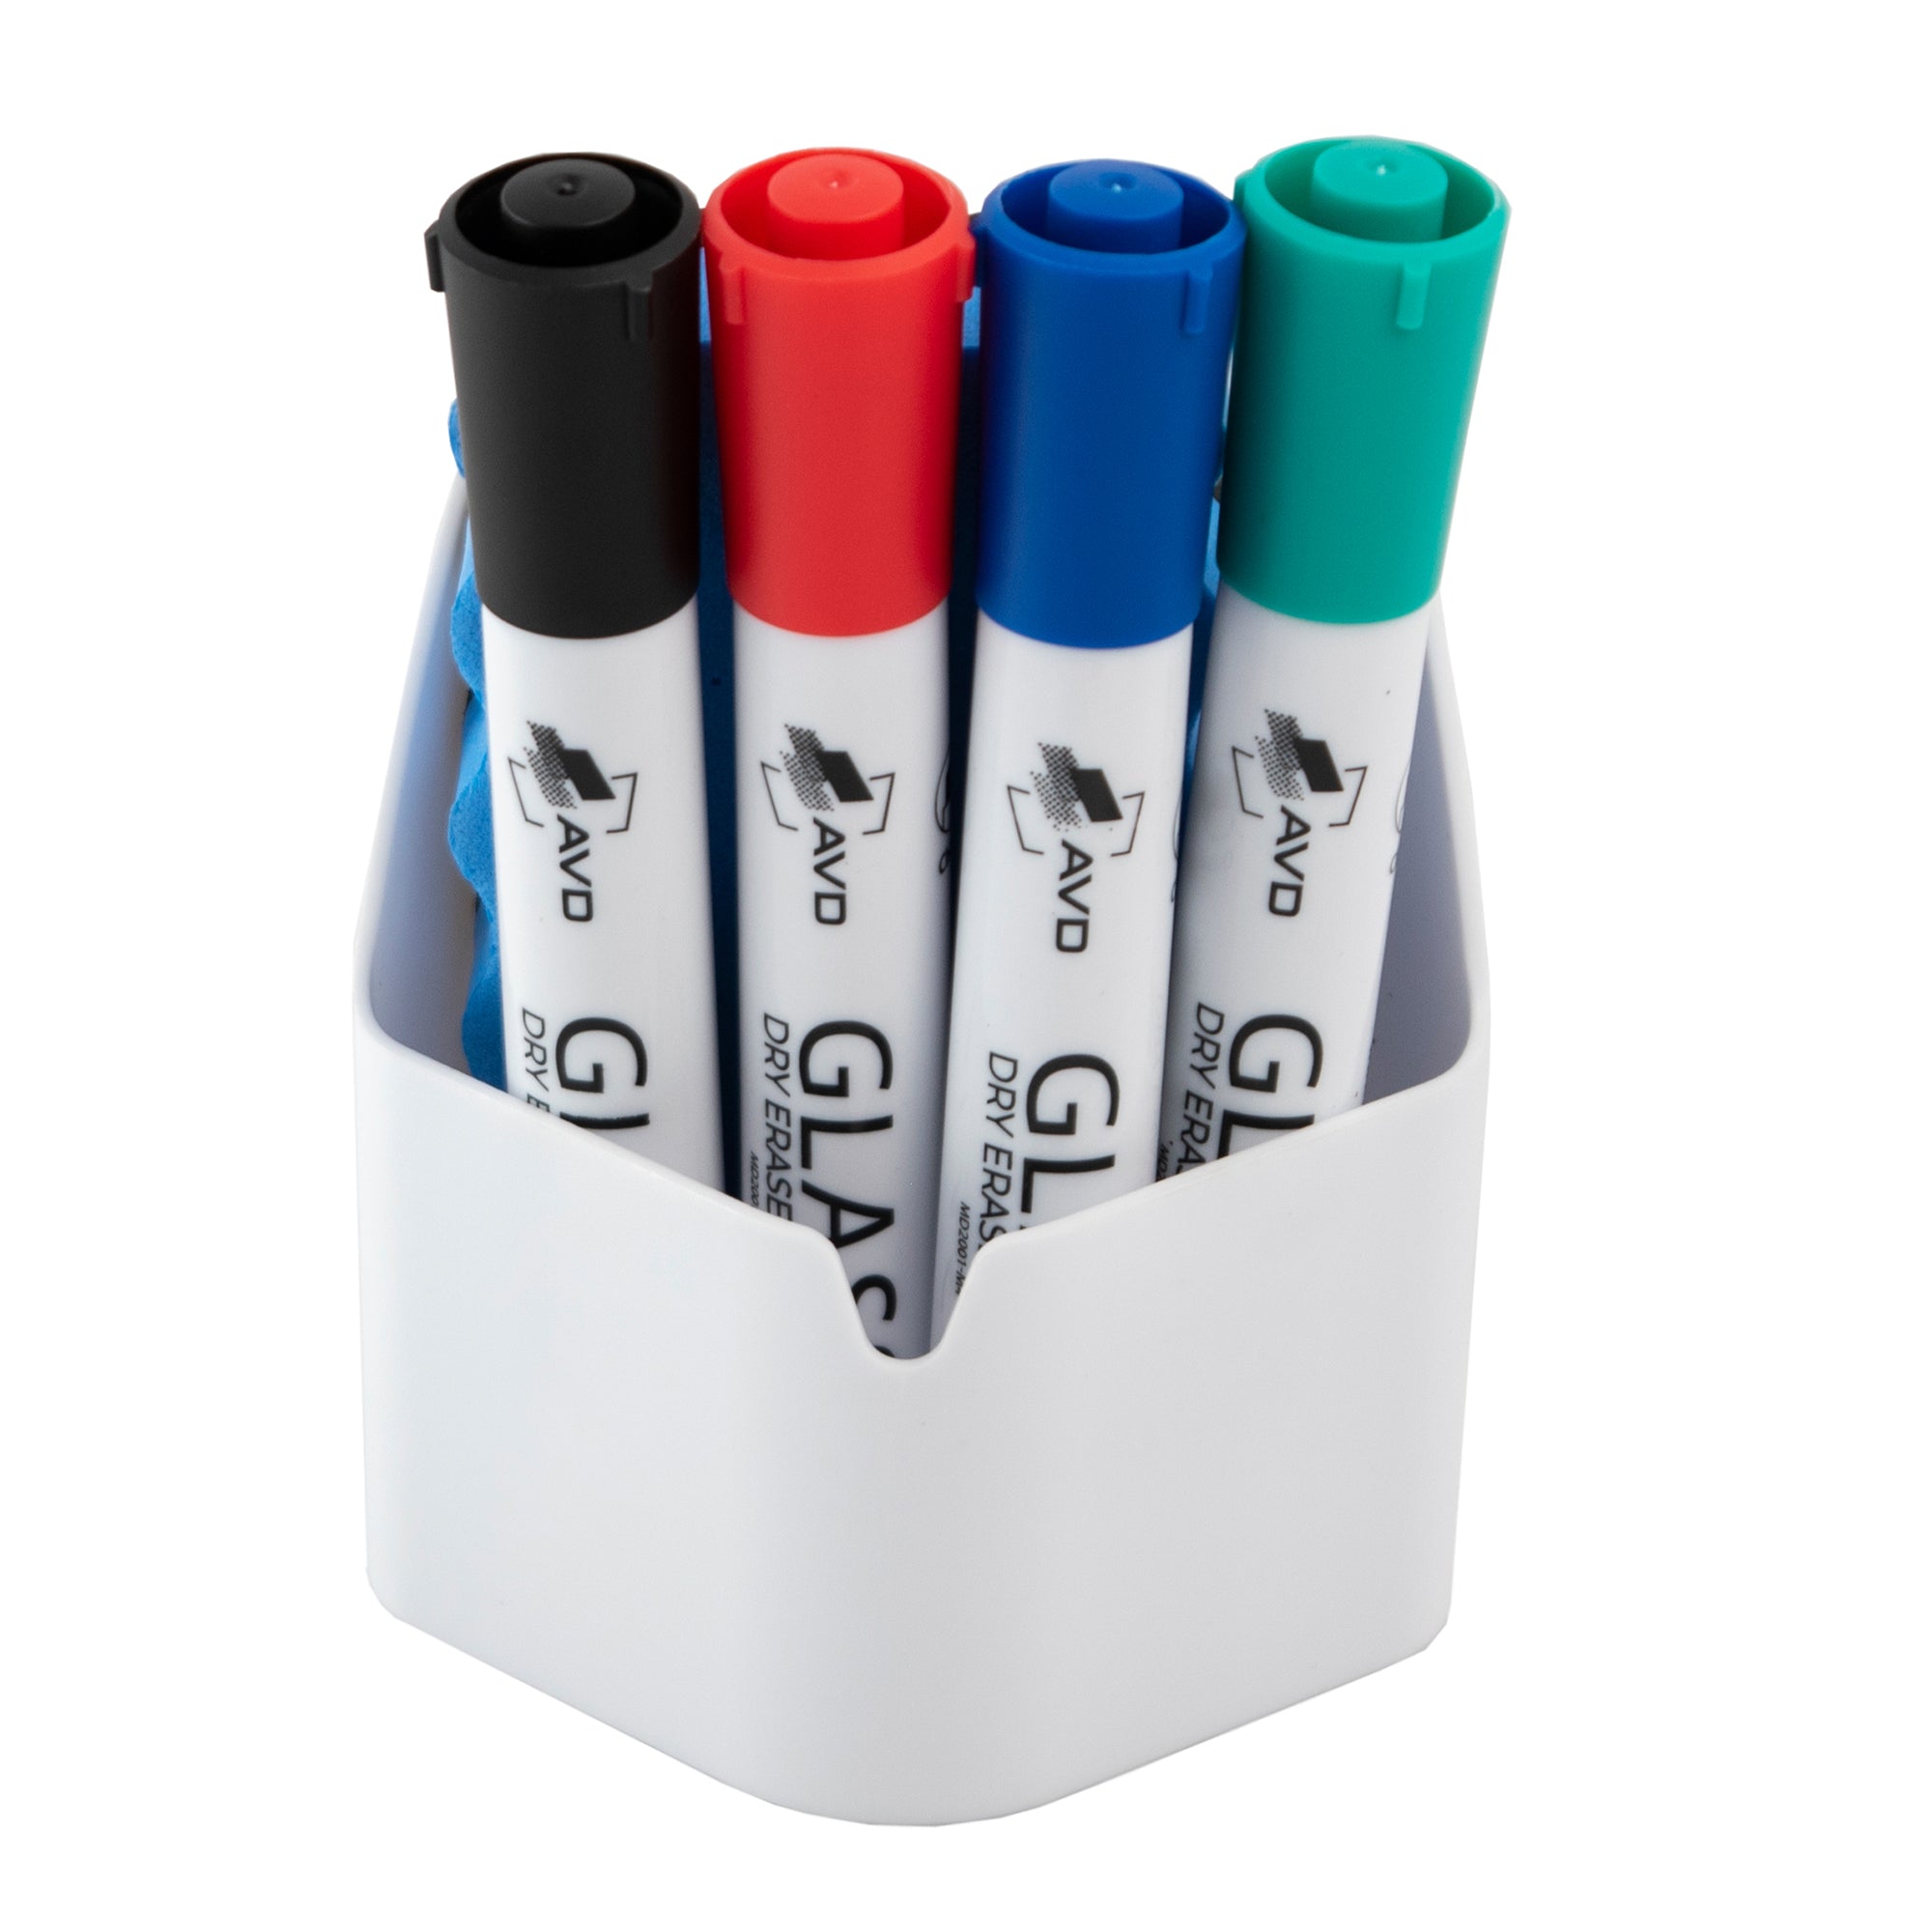 Audio-Visual Direct White Magnetic Marker Holder For Glass Dry Erase Boards. Neodymium Magnets for a secure hold.